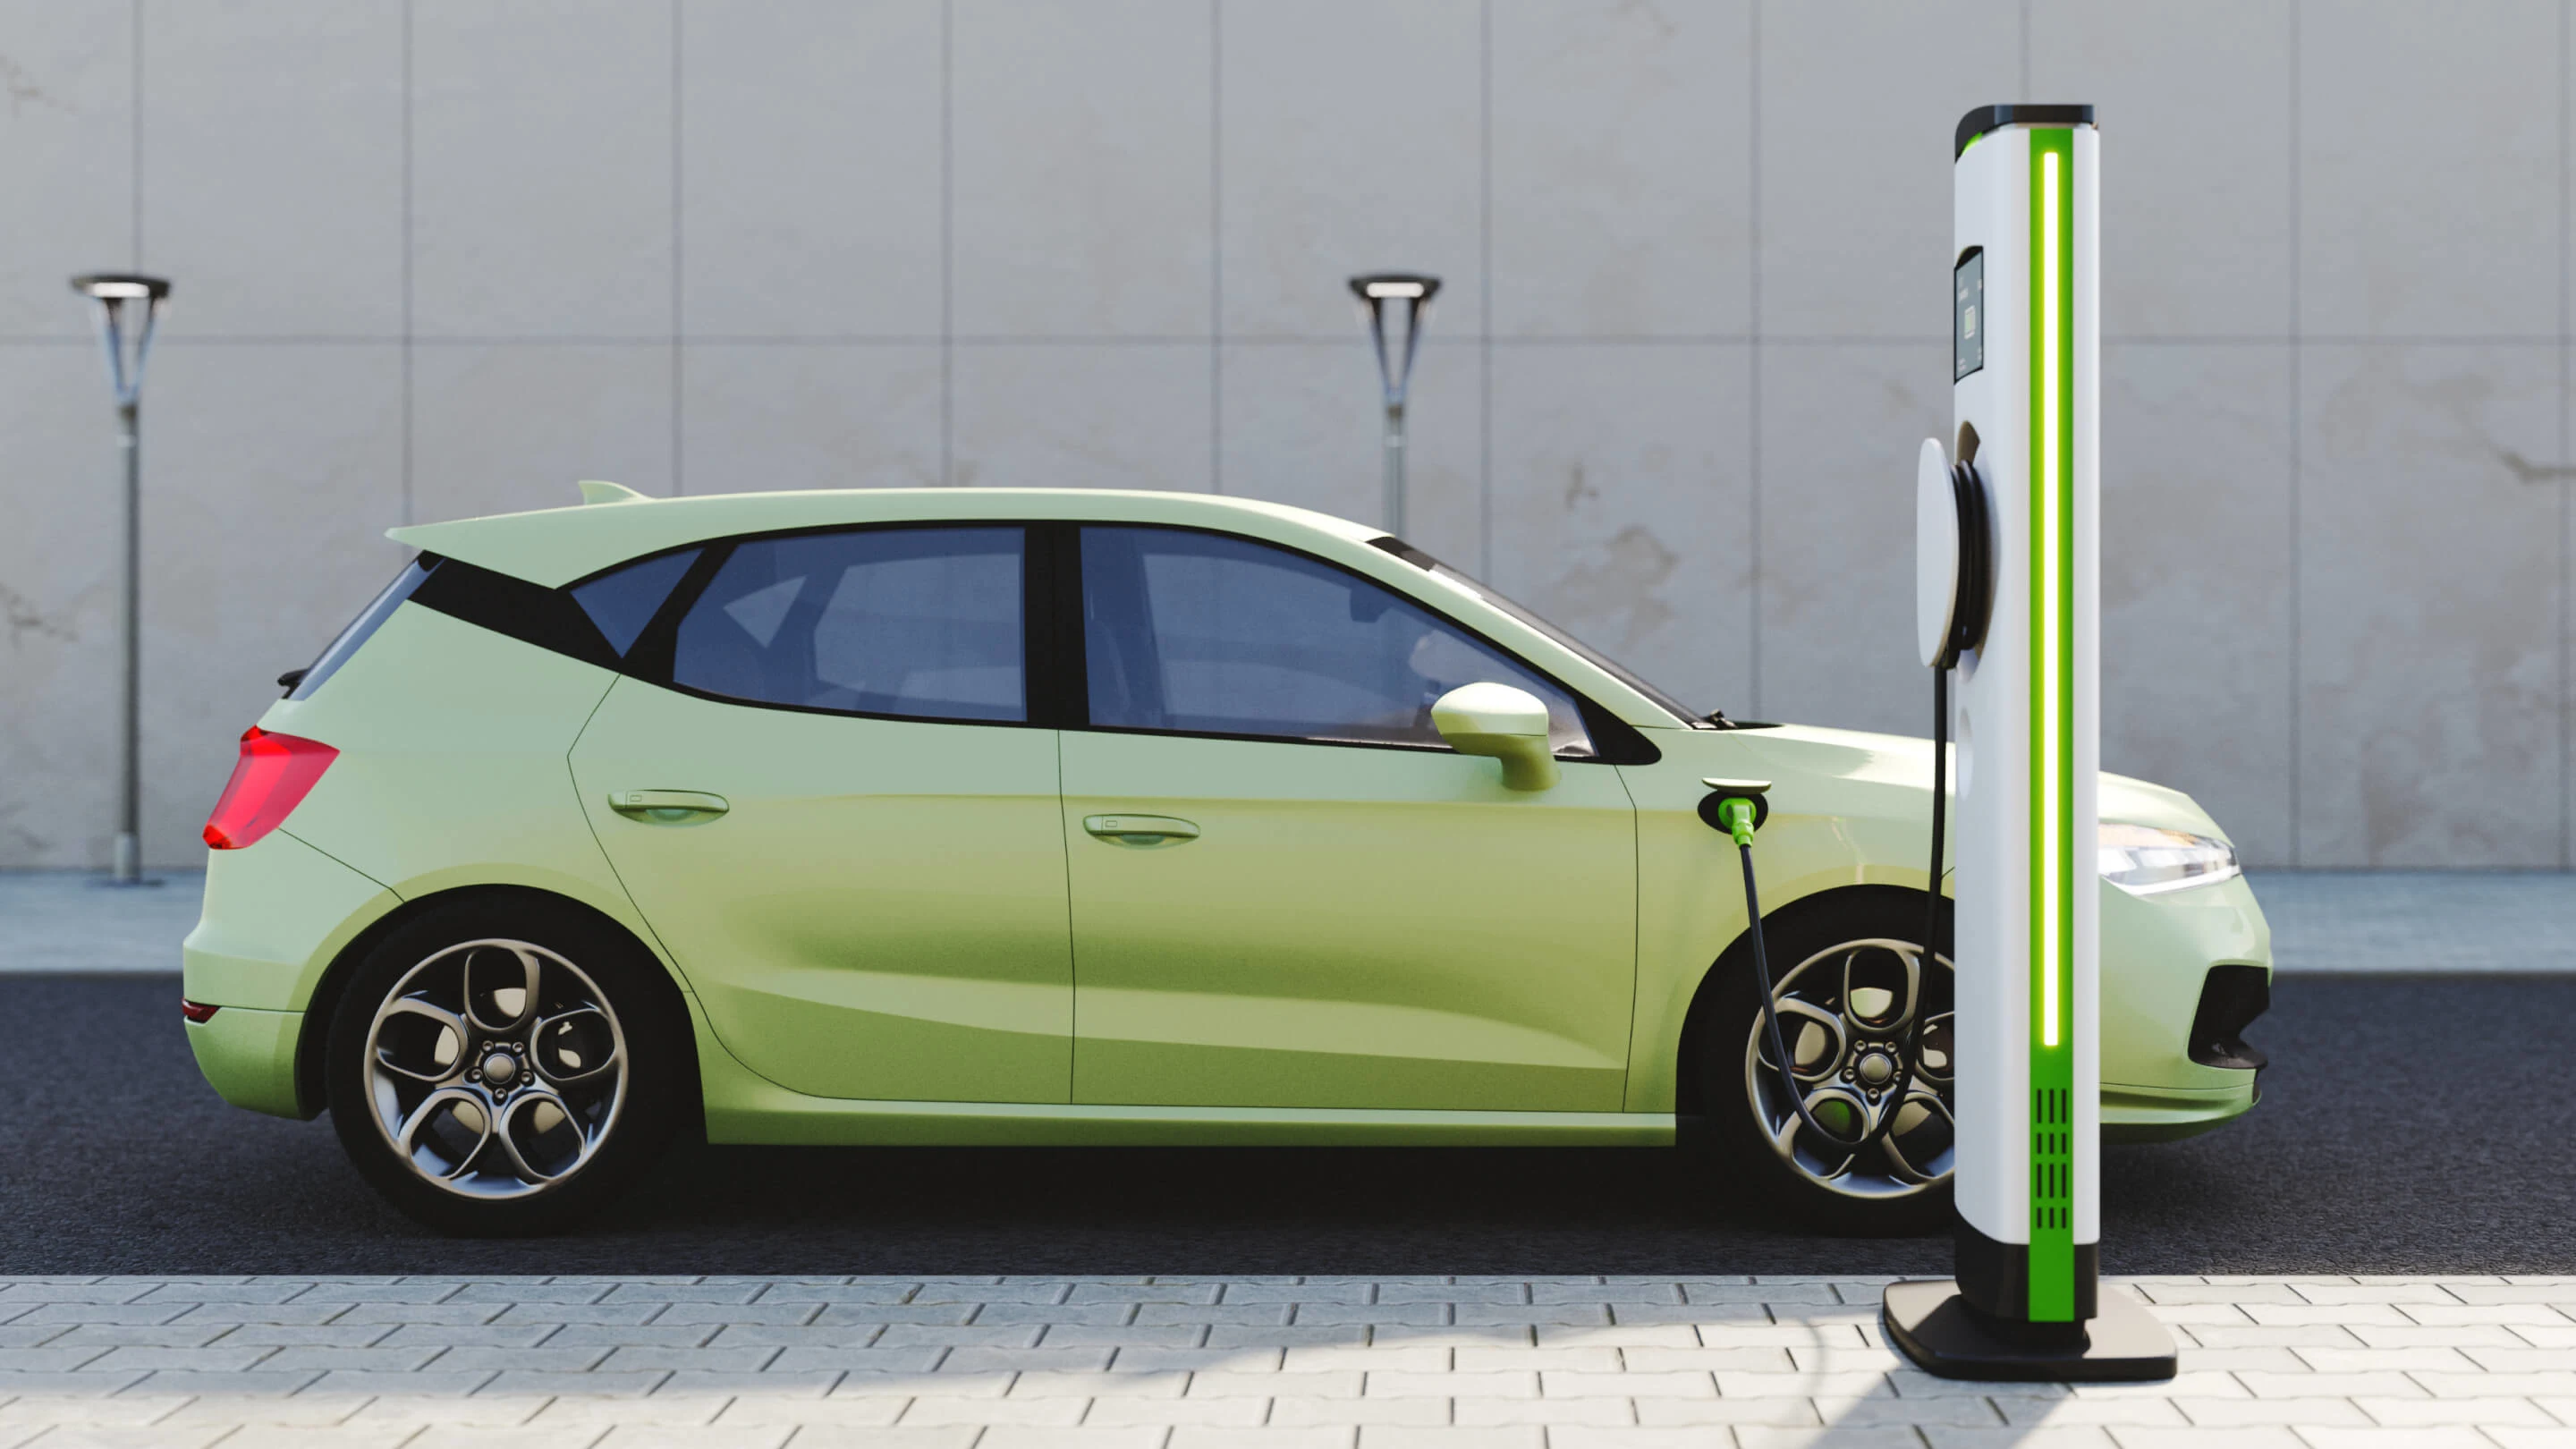 A green electric car is parked in front of a charging station, with a cable plugged into the car's charging port.